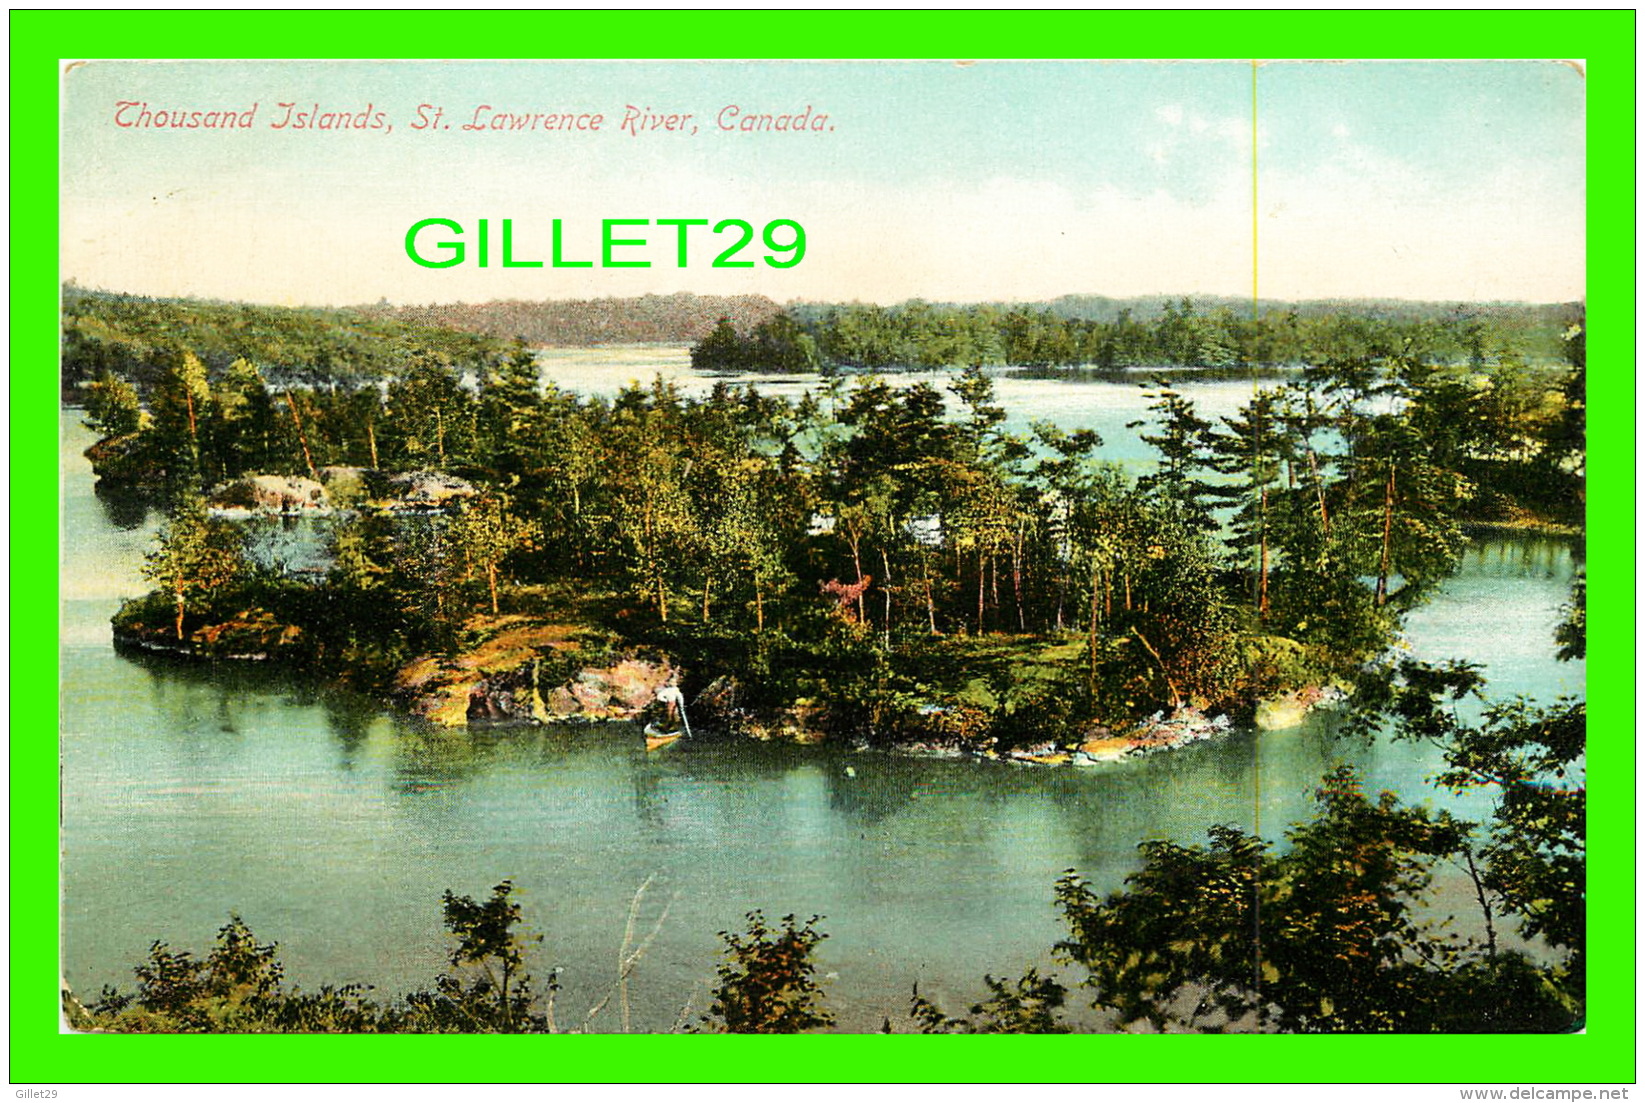 THOUSAND ISLANDS, ONTARIO - ST LAWRENCE RIVER - ANIMATED - STEDMAN BROS LTD - - Thousand Islands